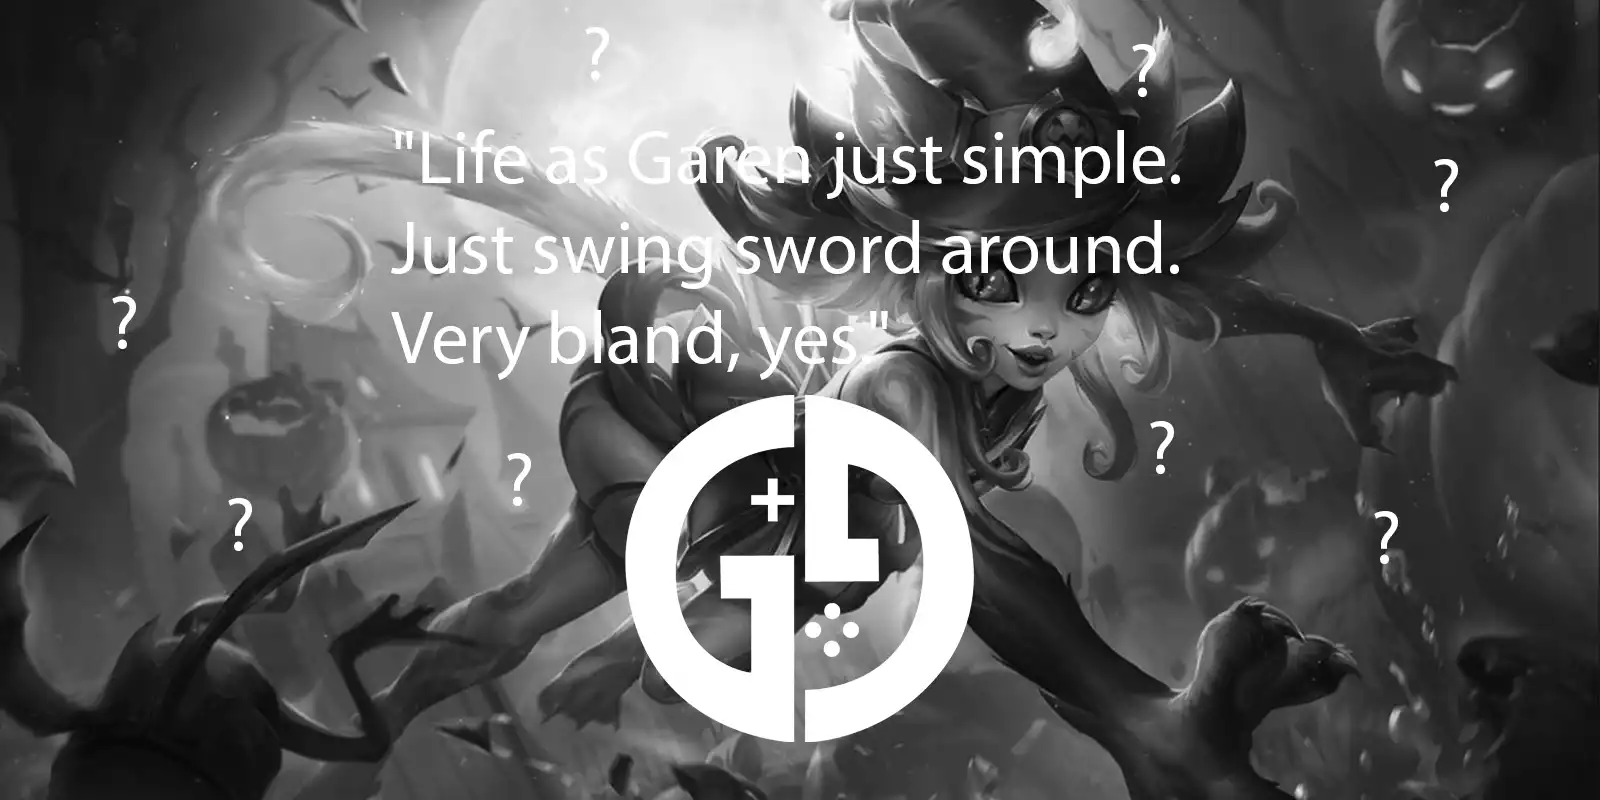 What champion says "Life as Garen just simple. Just swing sword around. Very bland, yes."?